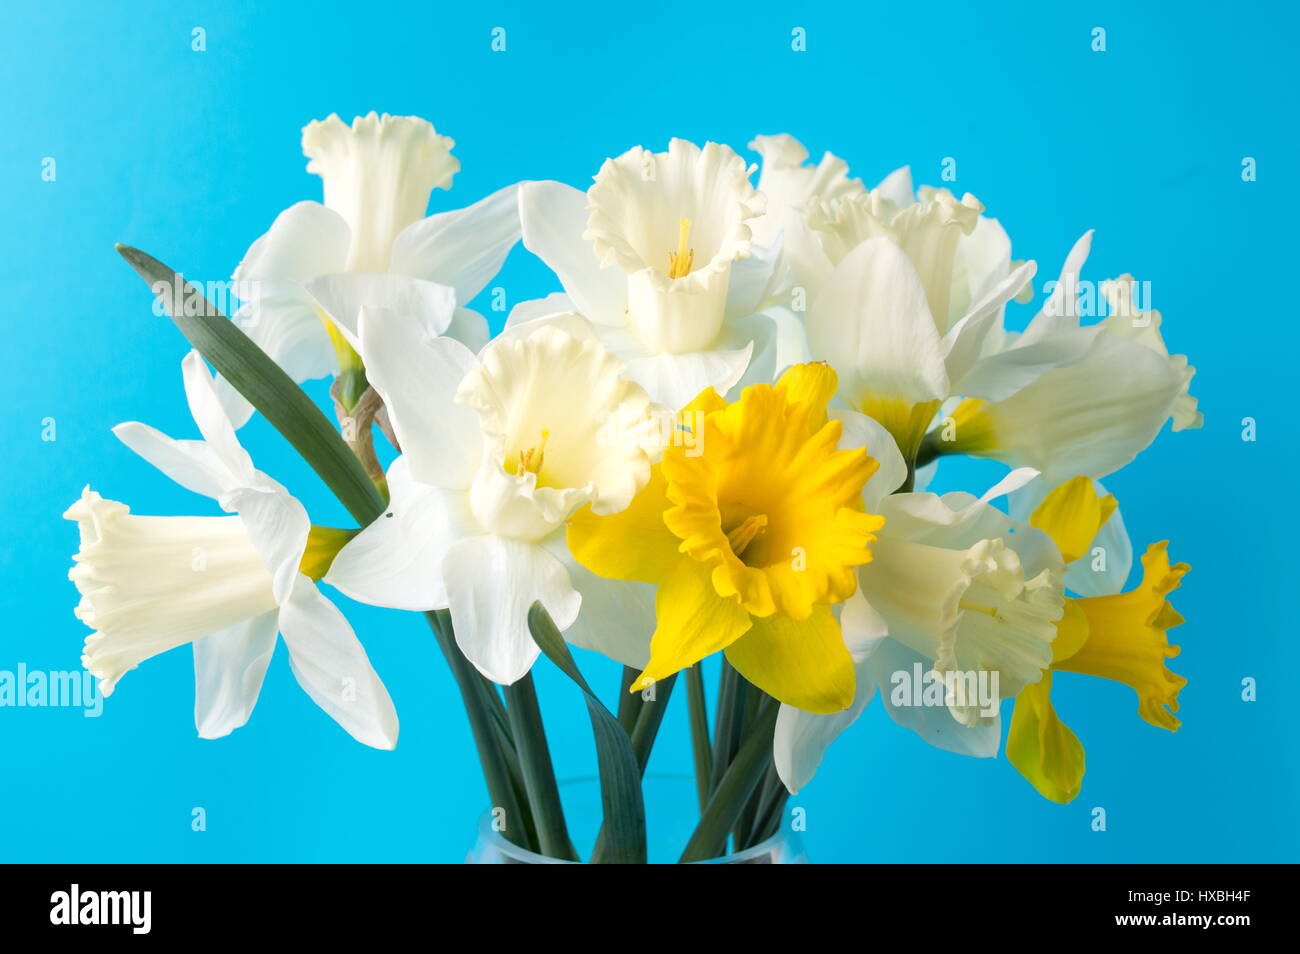 Narcissus flowers against blue background. Spring time Stock Photo